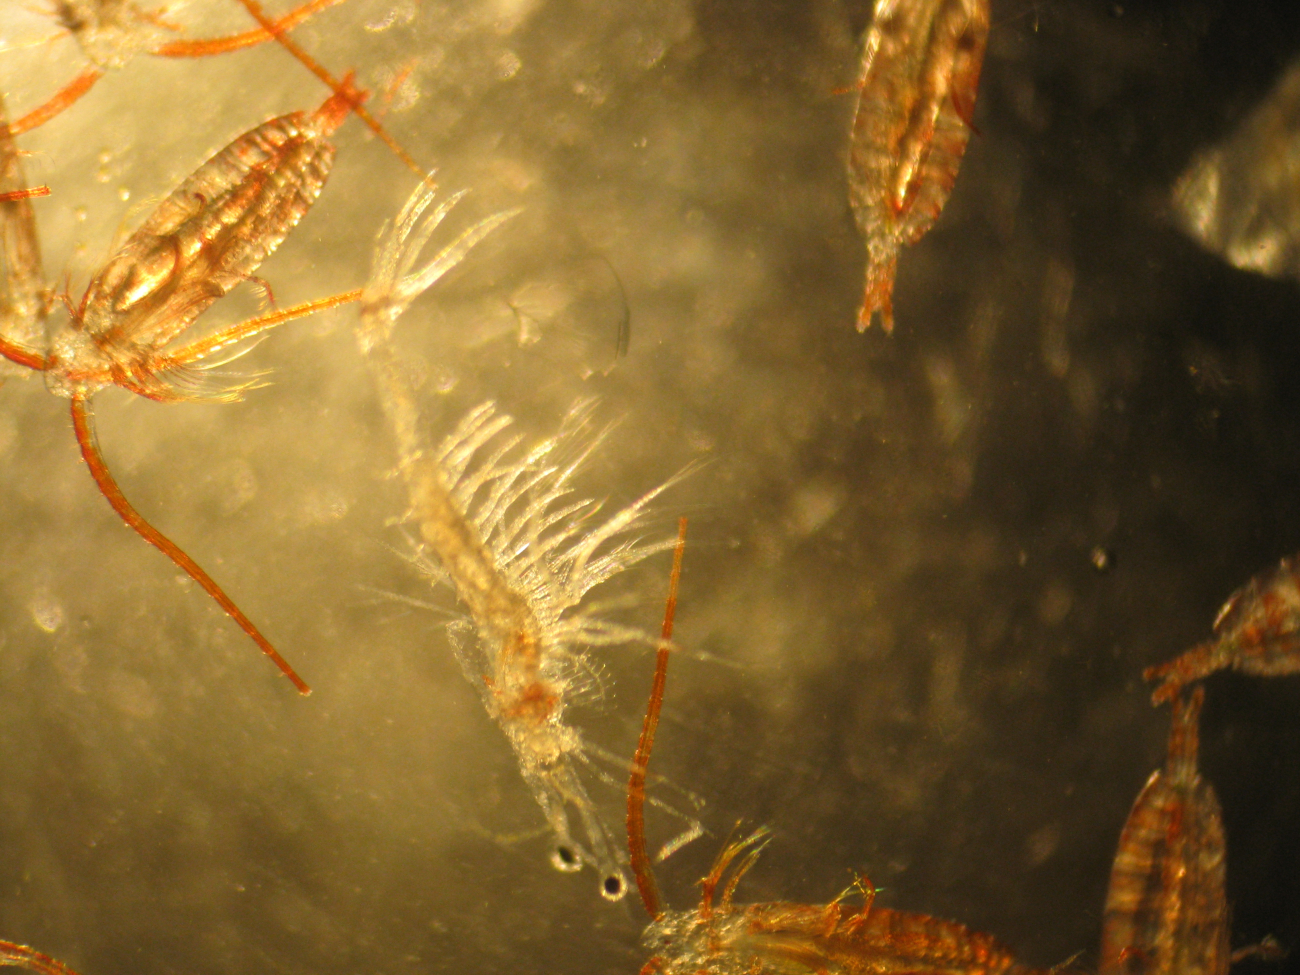 Through the microscope - copepods and a weird multi-legged thing